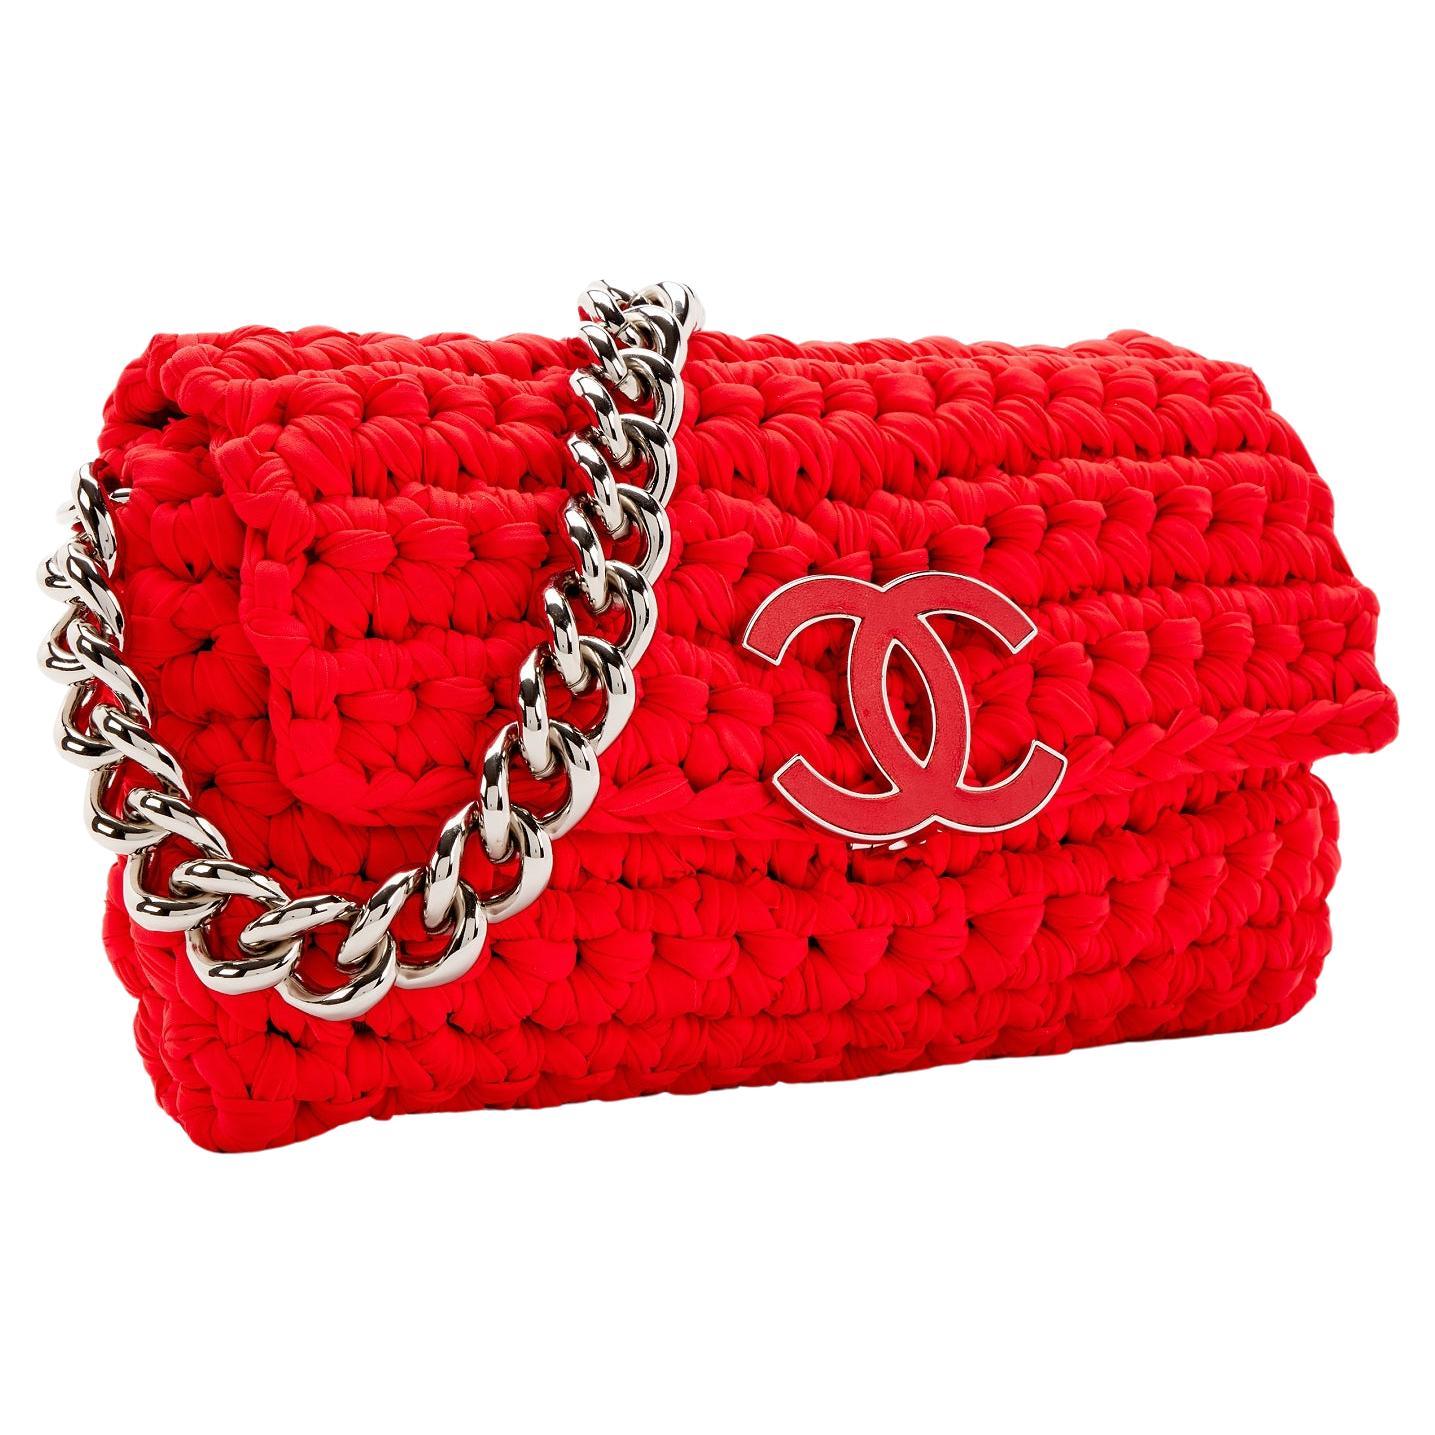 Chanel Red Cruise Crochet Logo Flap Bag For Sale